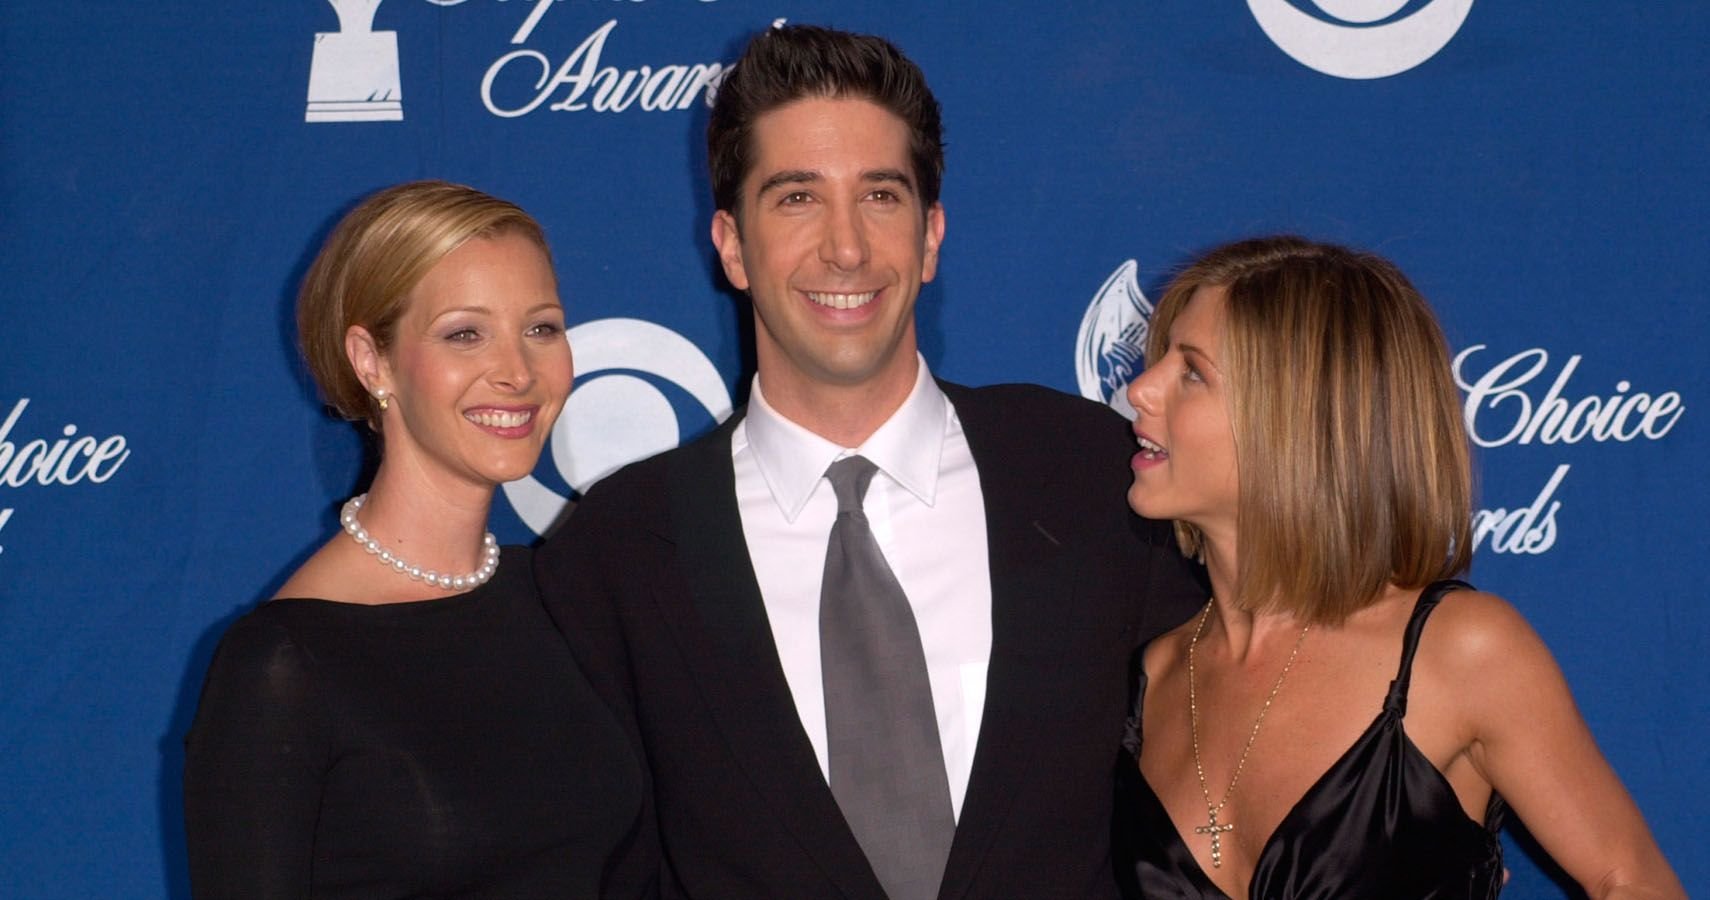 From Ross To Boss: How David Schwimmer Grew $100 Million